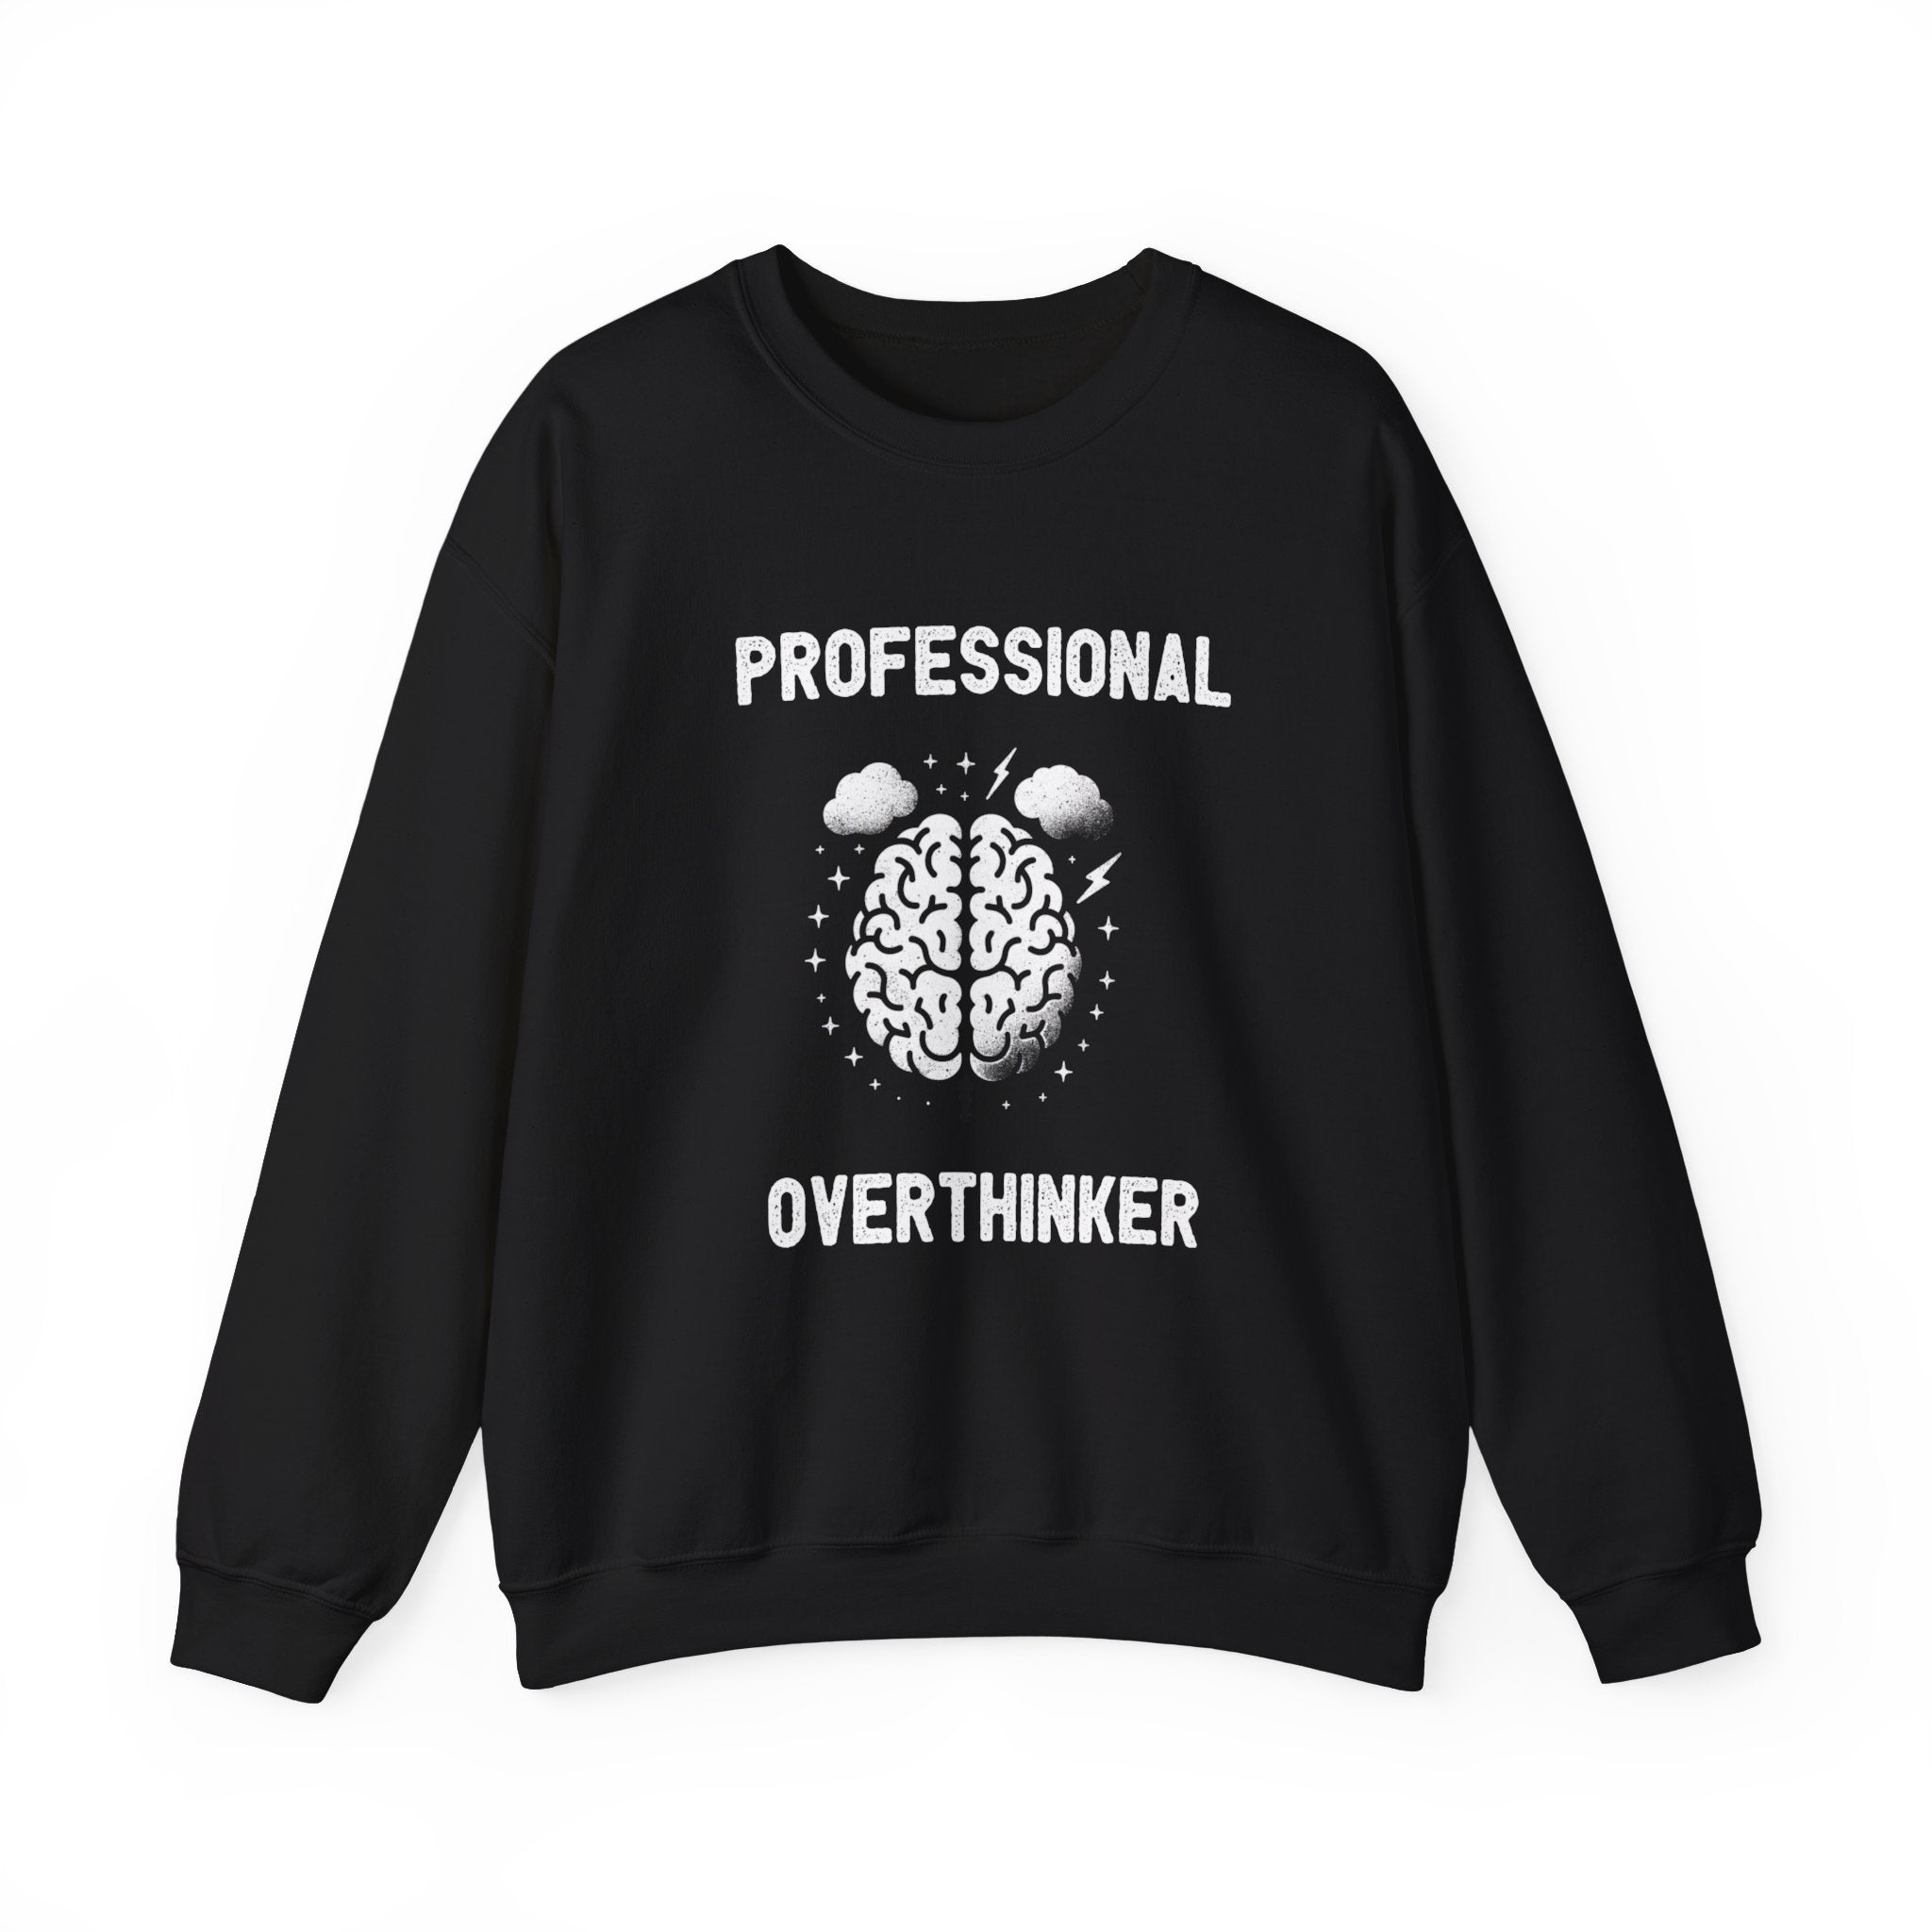 Stay warm during those overthinking sessions with the Professional Overthinker - Sweatshirt. This black sweatshirt features the text "PROFESSIONAL OVERTHINKER" and an illustration of a brain with clouds and lightning bolts, perfect for chilly days.